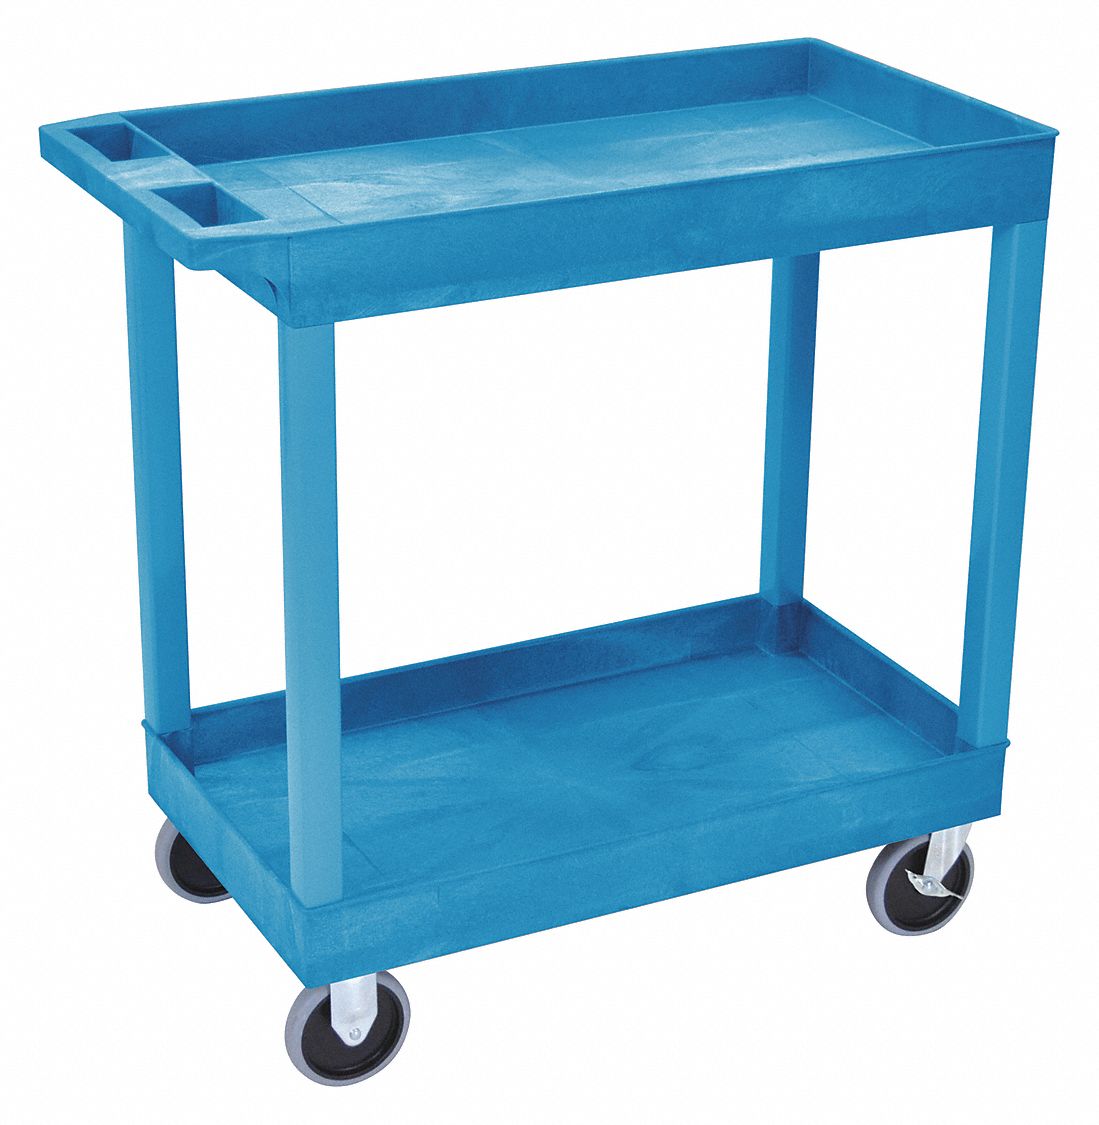 Utility Cart with Deep Lipped Plastic Shelves: 500 lb Load Capacity, 32 in x 18 in, Blue